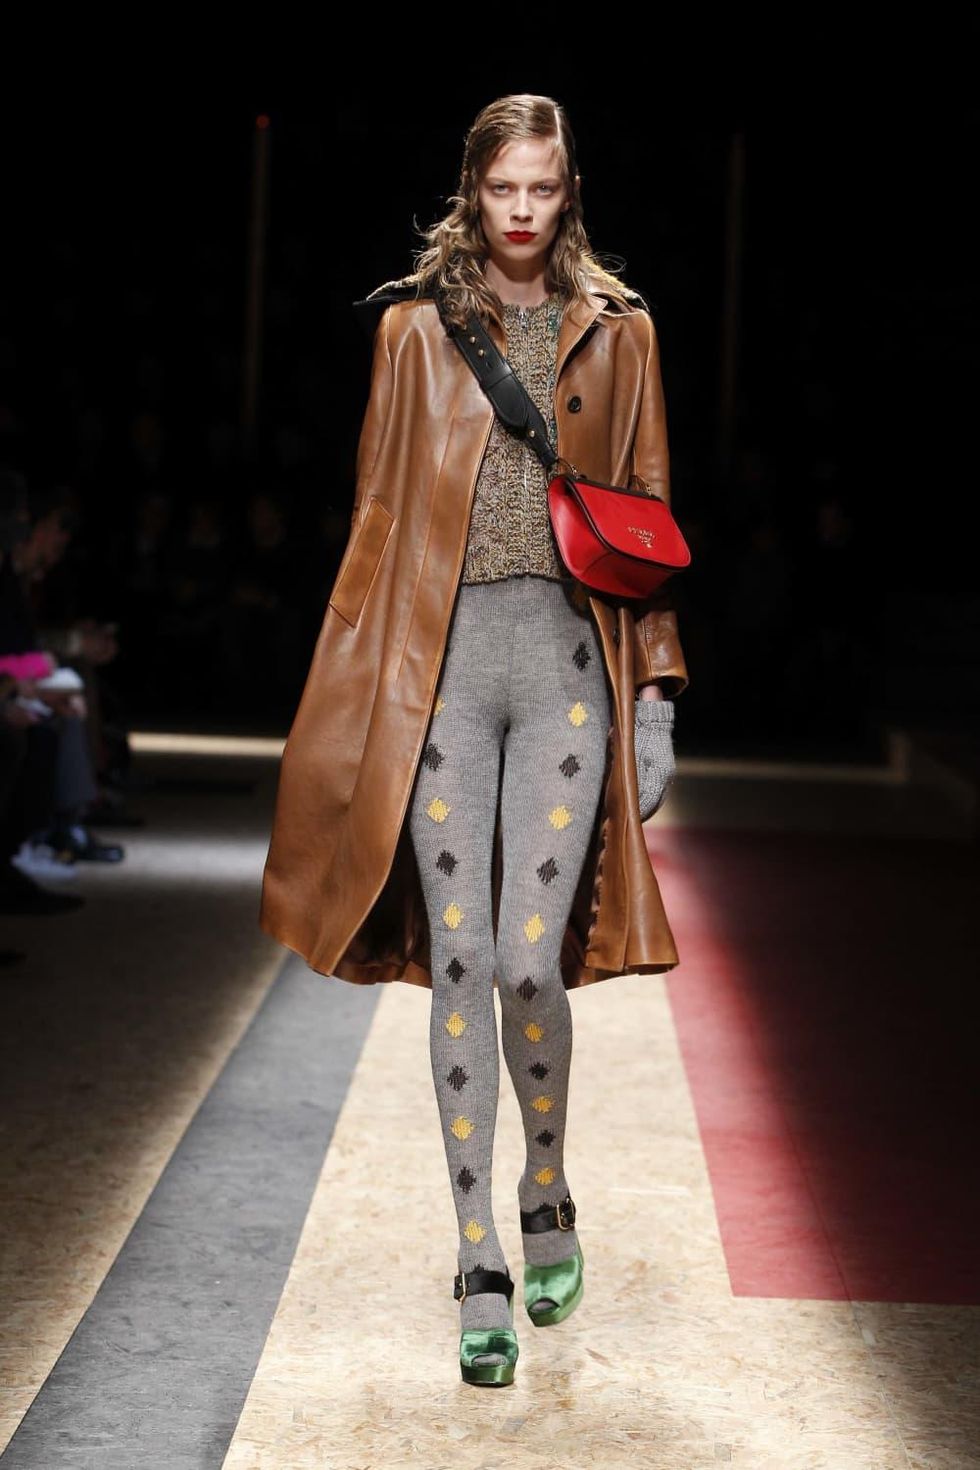 Cape coats and sailor hats were part of the Prada fall menswear collection.  - CultureMap Houston